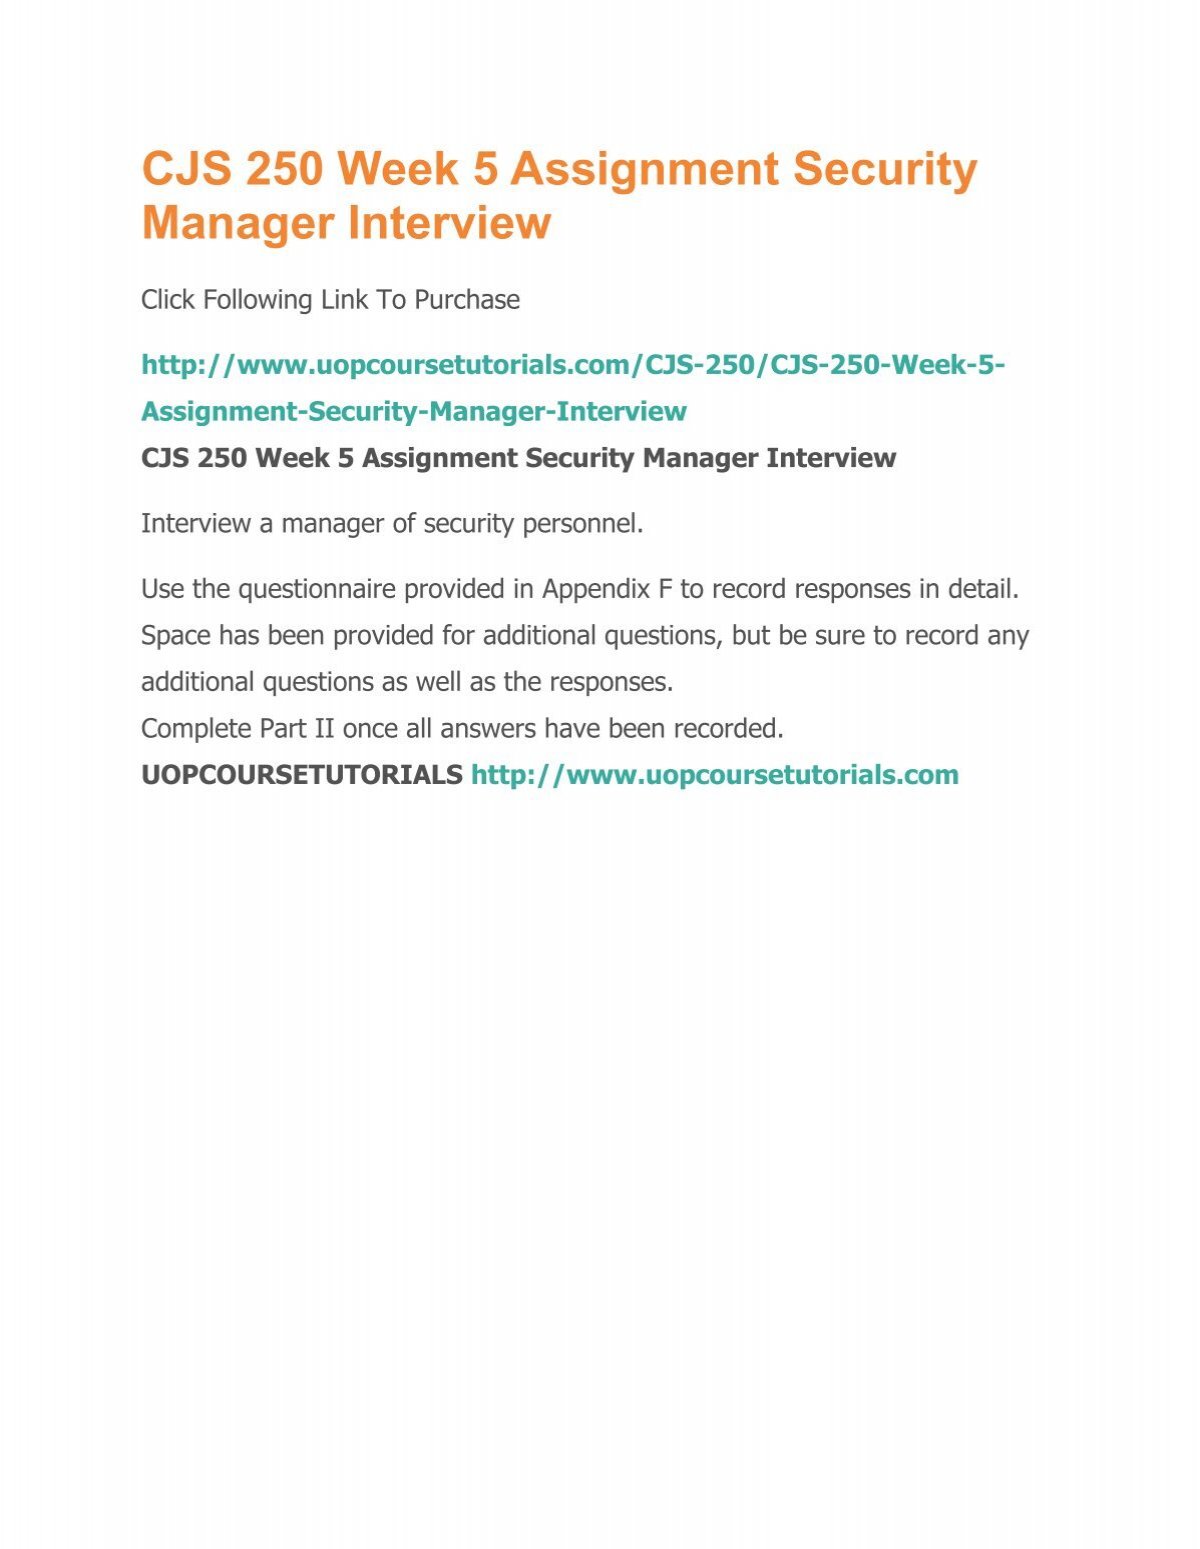 assignment security manager